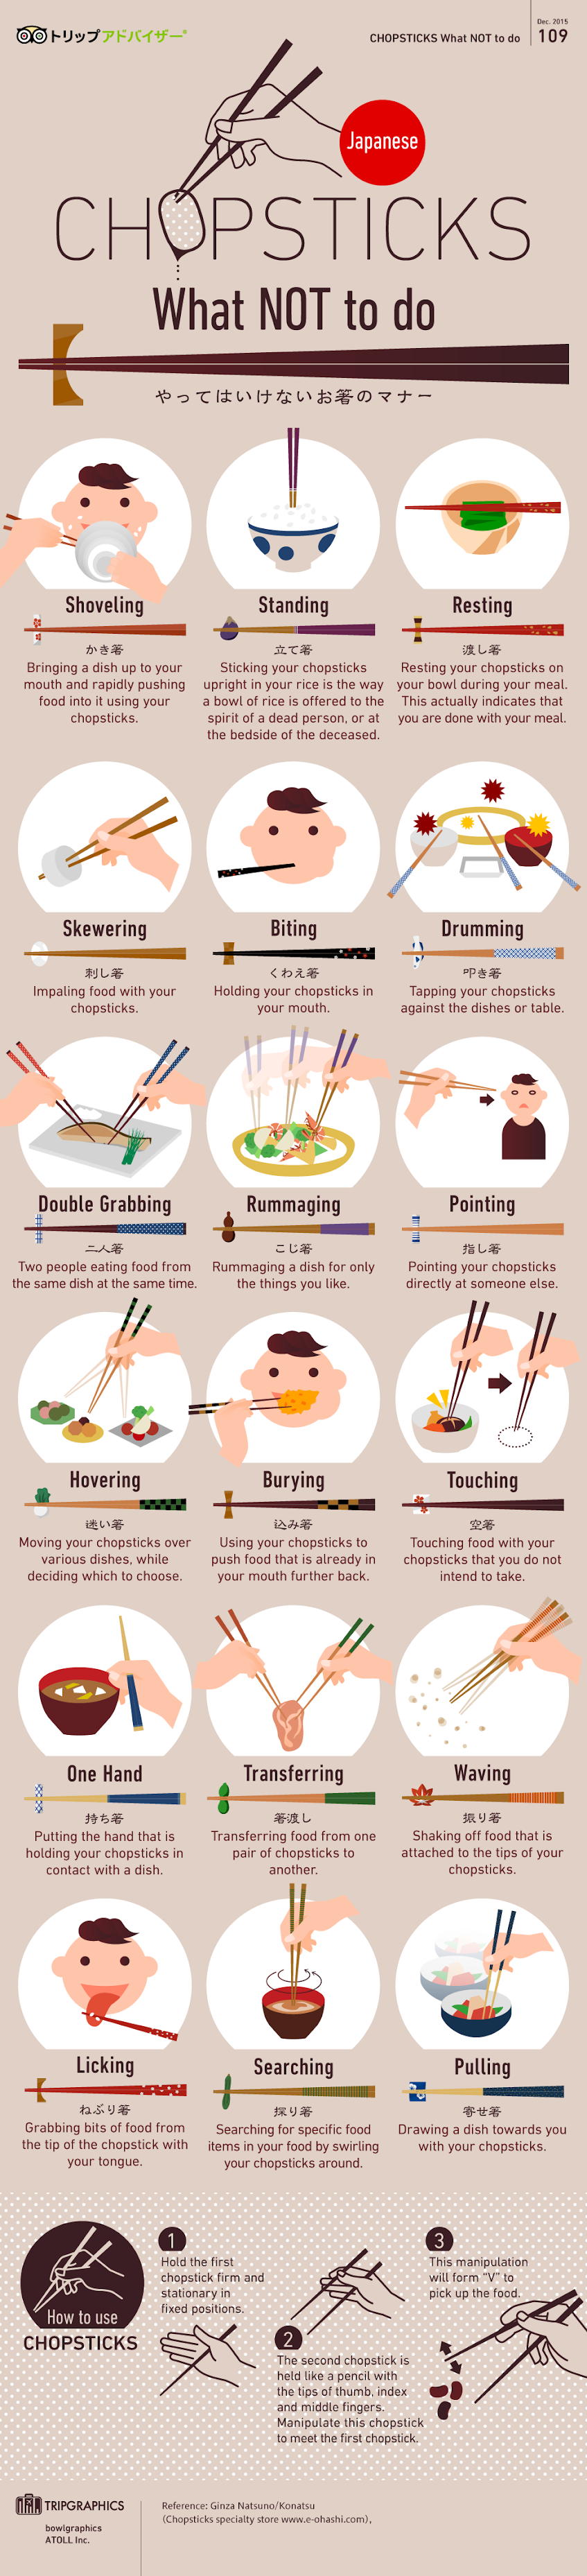 Chopsticks What Not To Do #infographic